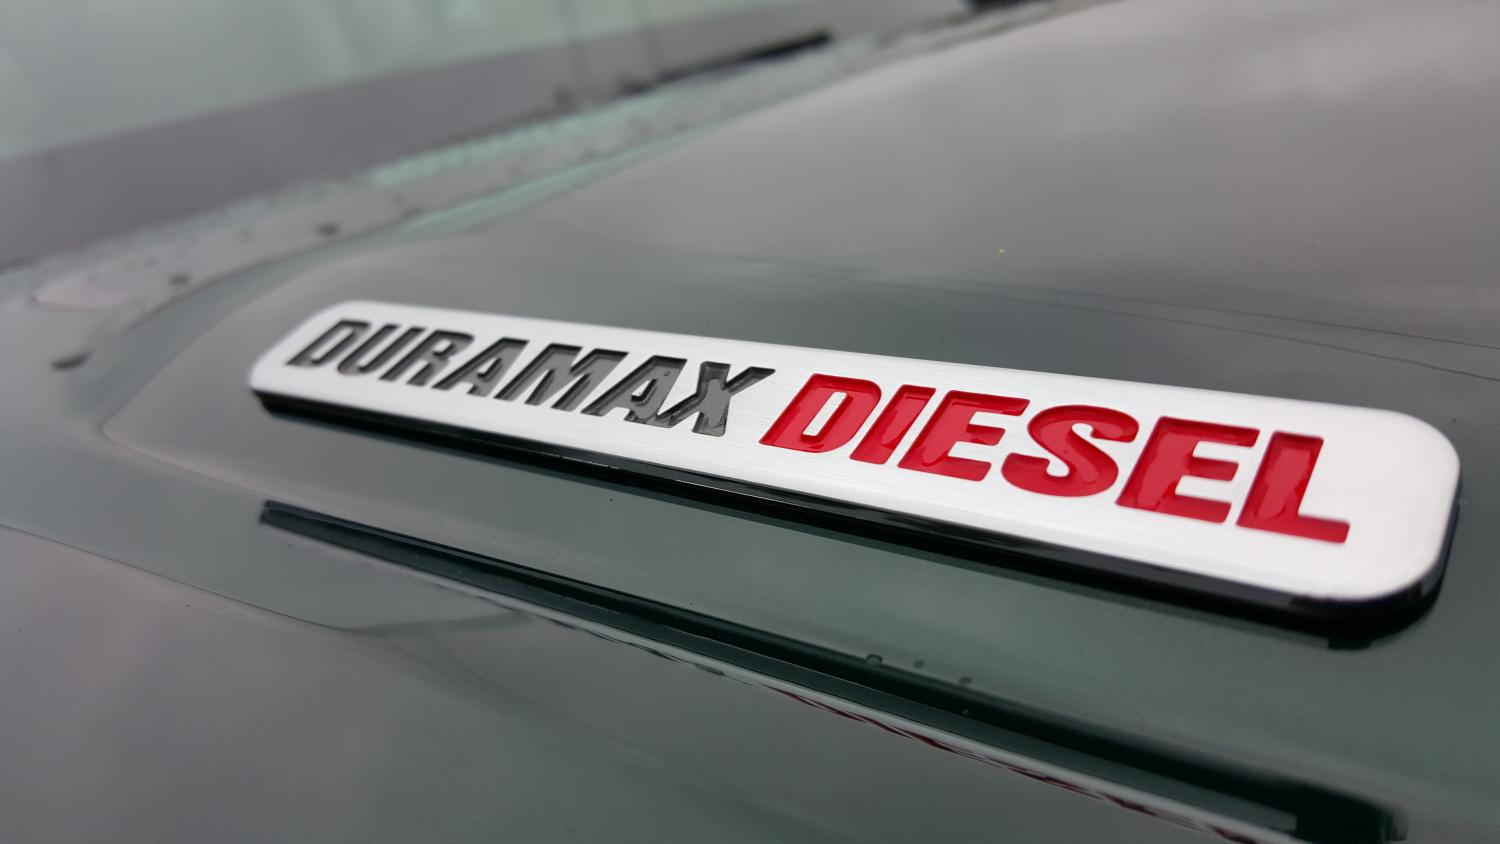 More information about "First Drive: 2016 Chevrolet & GMC 2.8L Duramax Diesel Engine"